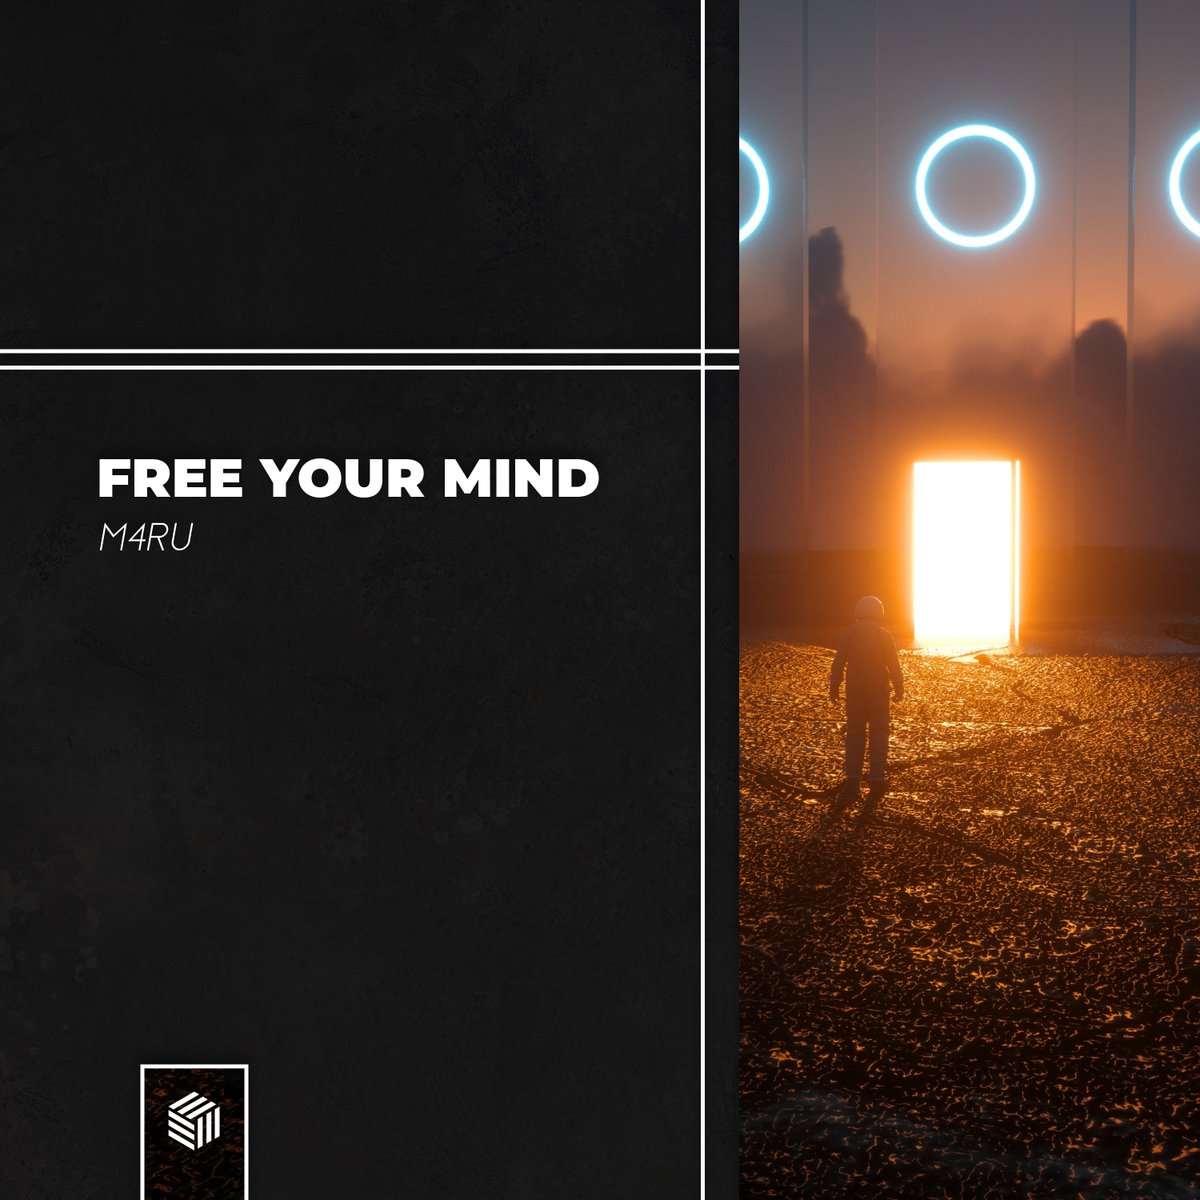 Free Your Mind is OUT NOW🖤
fhcs.fanlink.to/freeyourmind
.
#music #newmusic #m4ru #edm #edmmusic #futurehouse #futurehousemusic #basshouse #basshousemusic #freeyourmind #futurehousecloud  #newsingle #instagram #facebook #twitter #newtweet
.
🎶